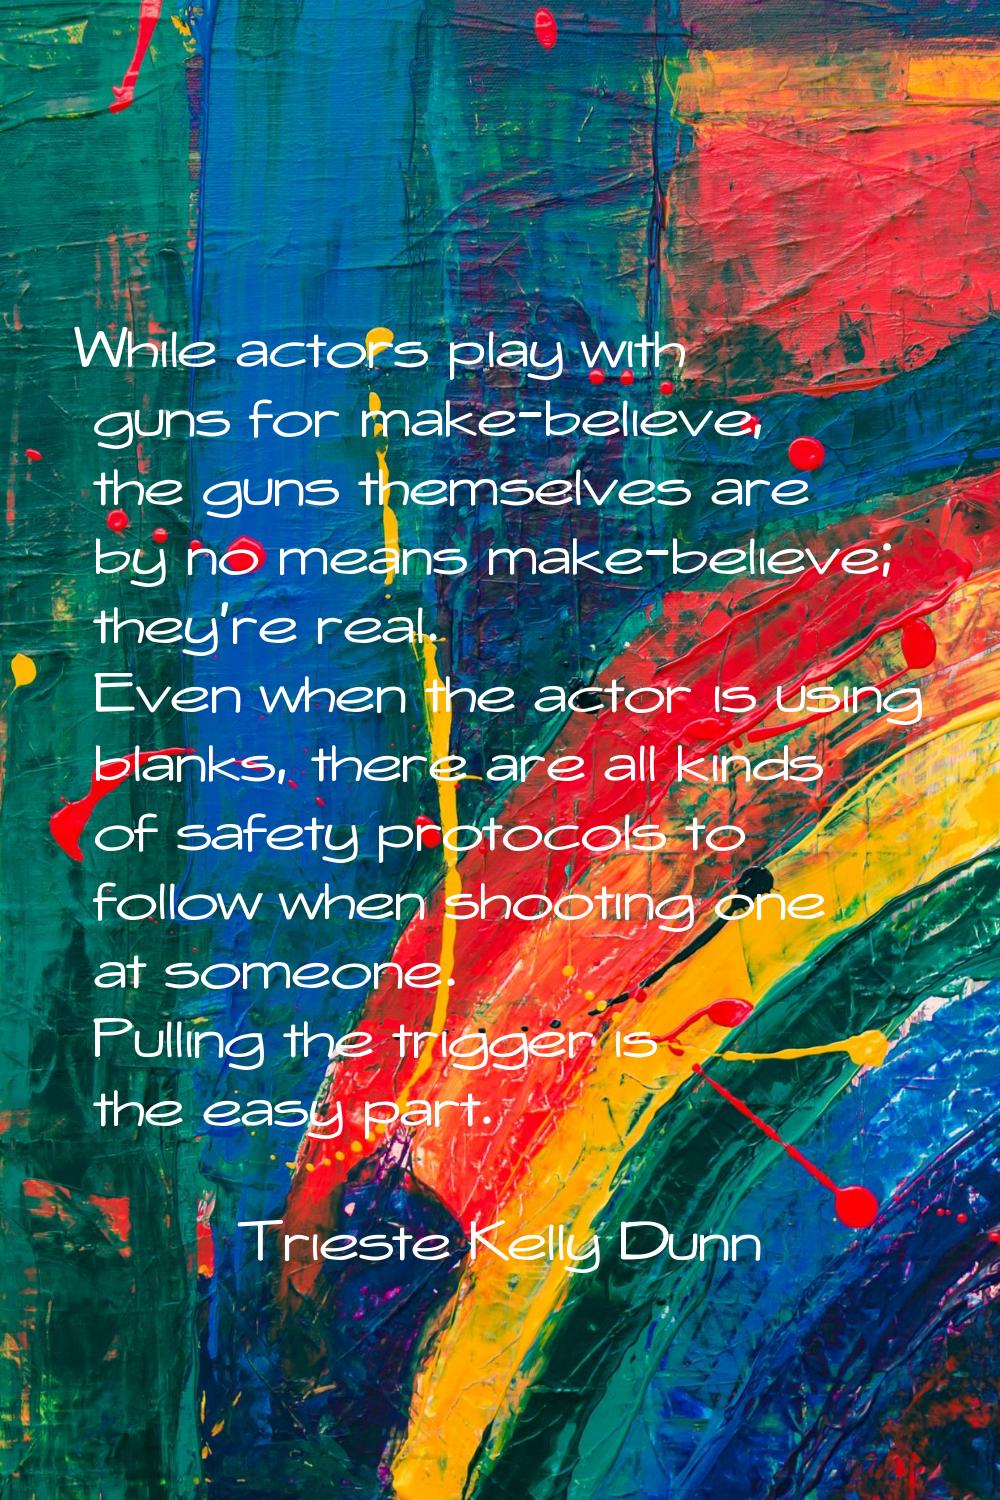 While actors play with guns for make-believe, the guns themselves are by no means make-believe; the